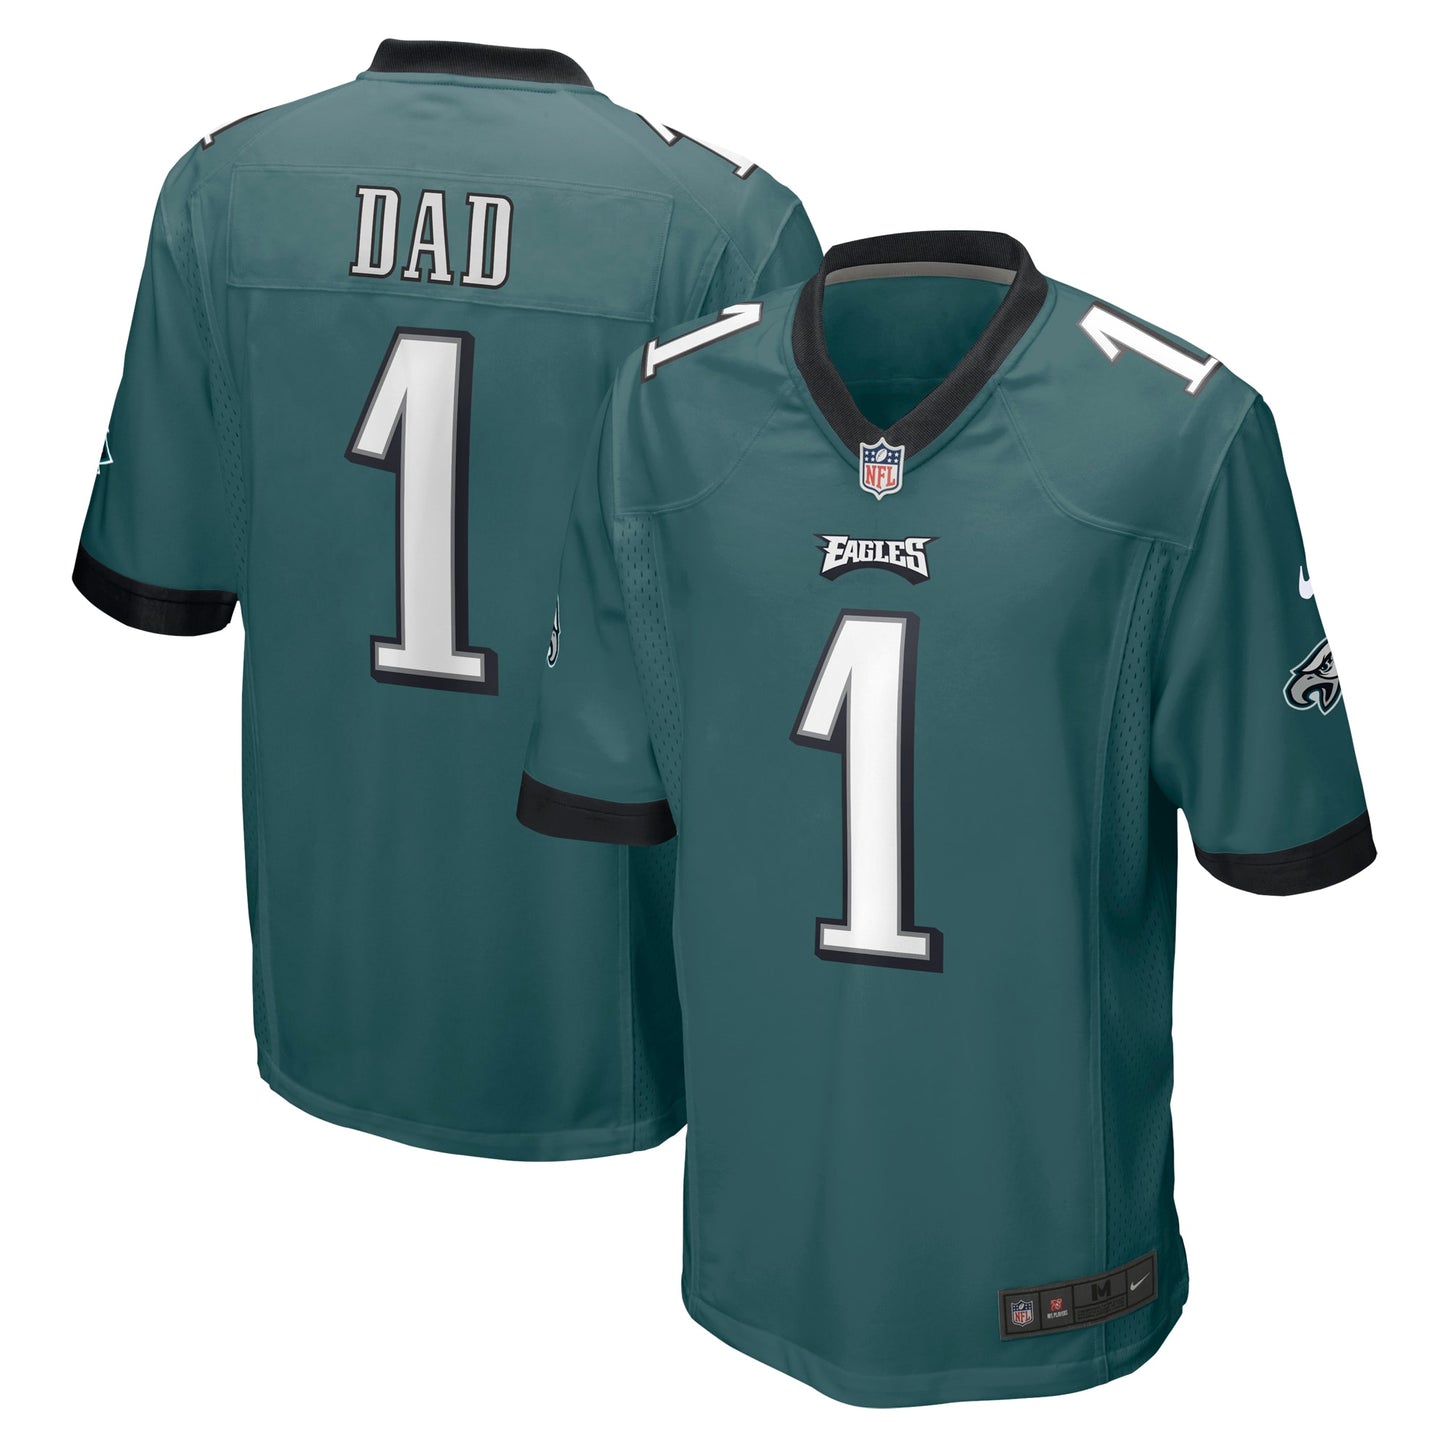 Number 1 Dad Philadelphia Eagles Nike Game Jersey - Midnight Green